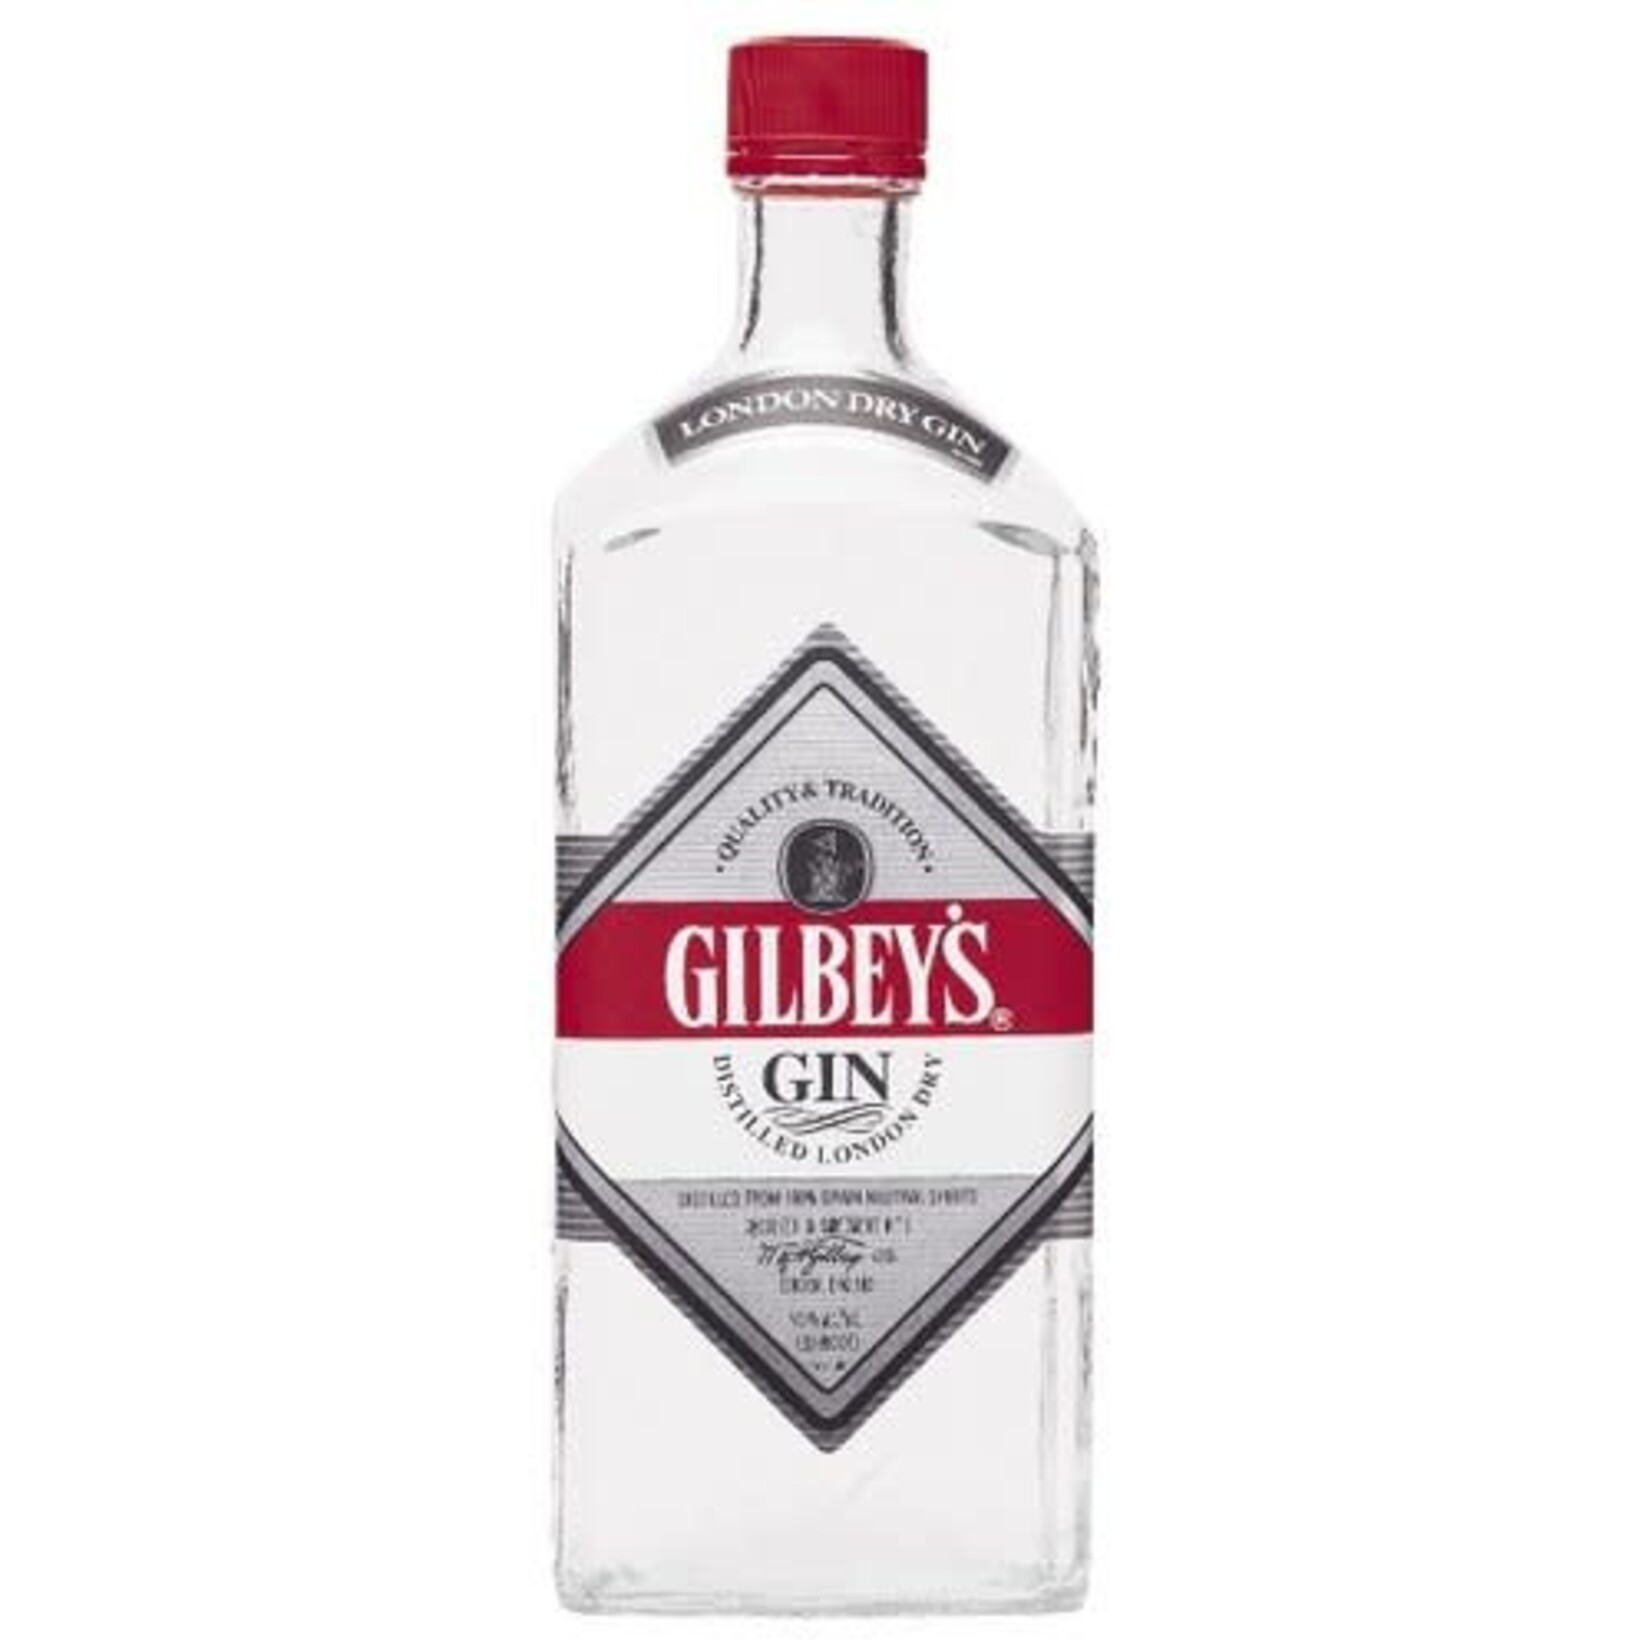 GILBEY'S GILBEY'S	GIN	.750L